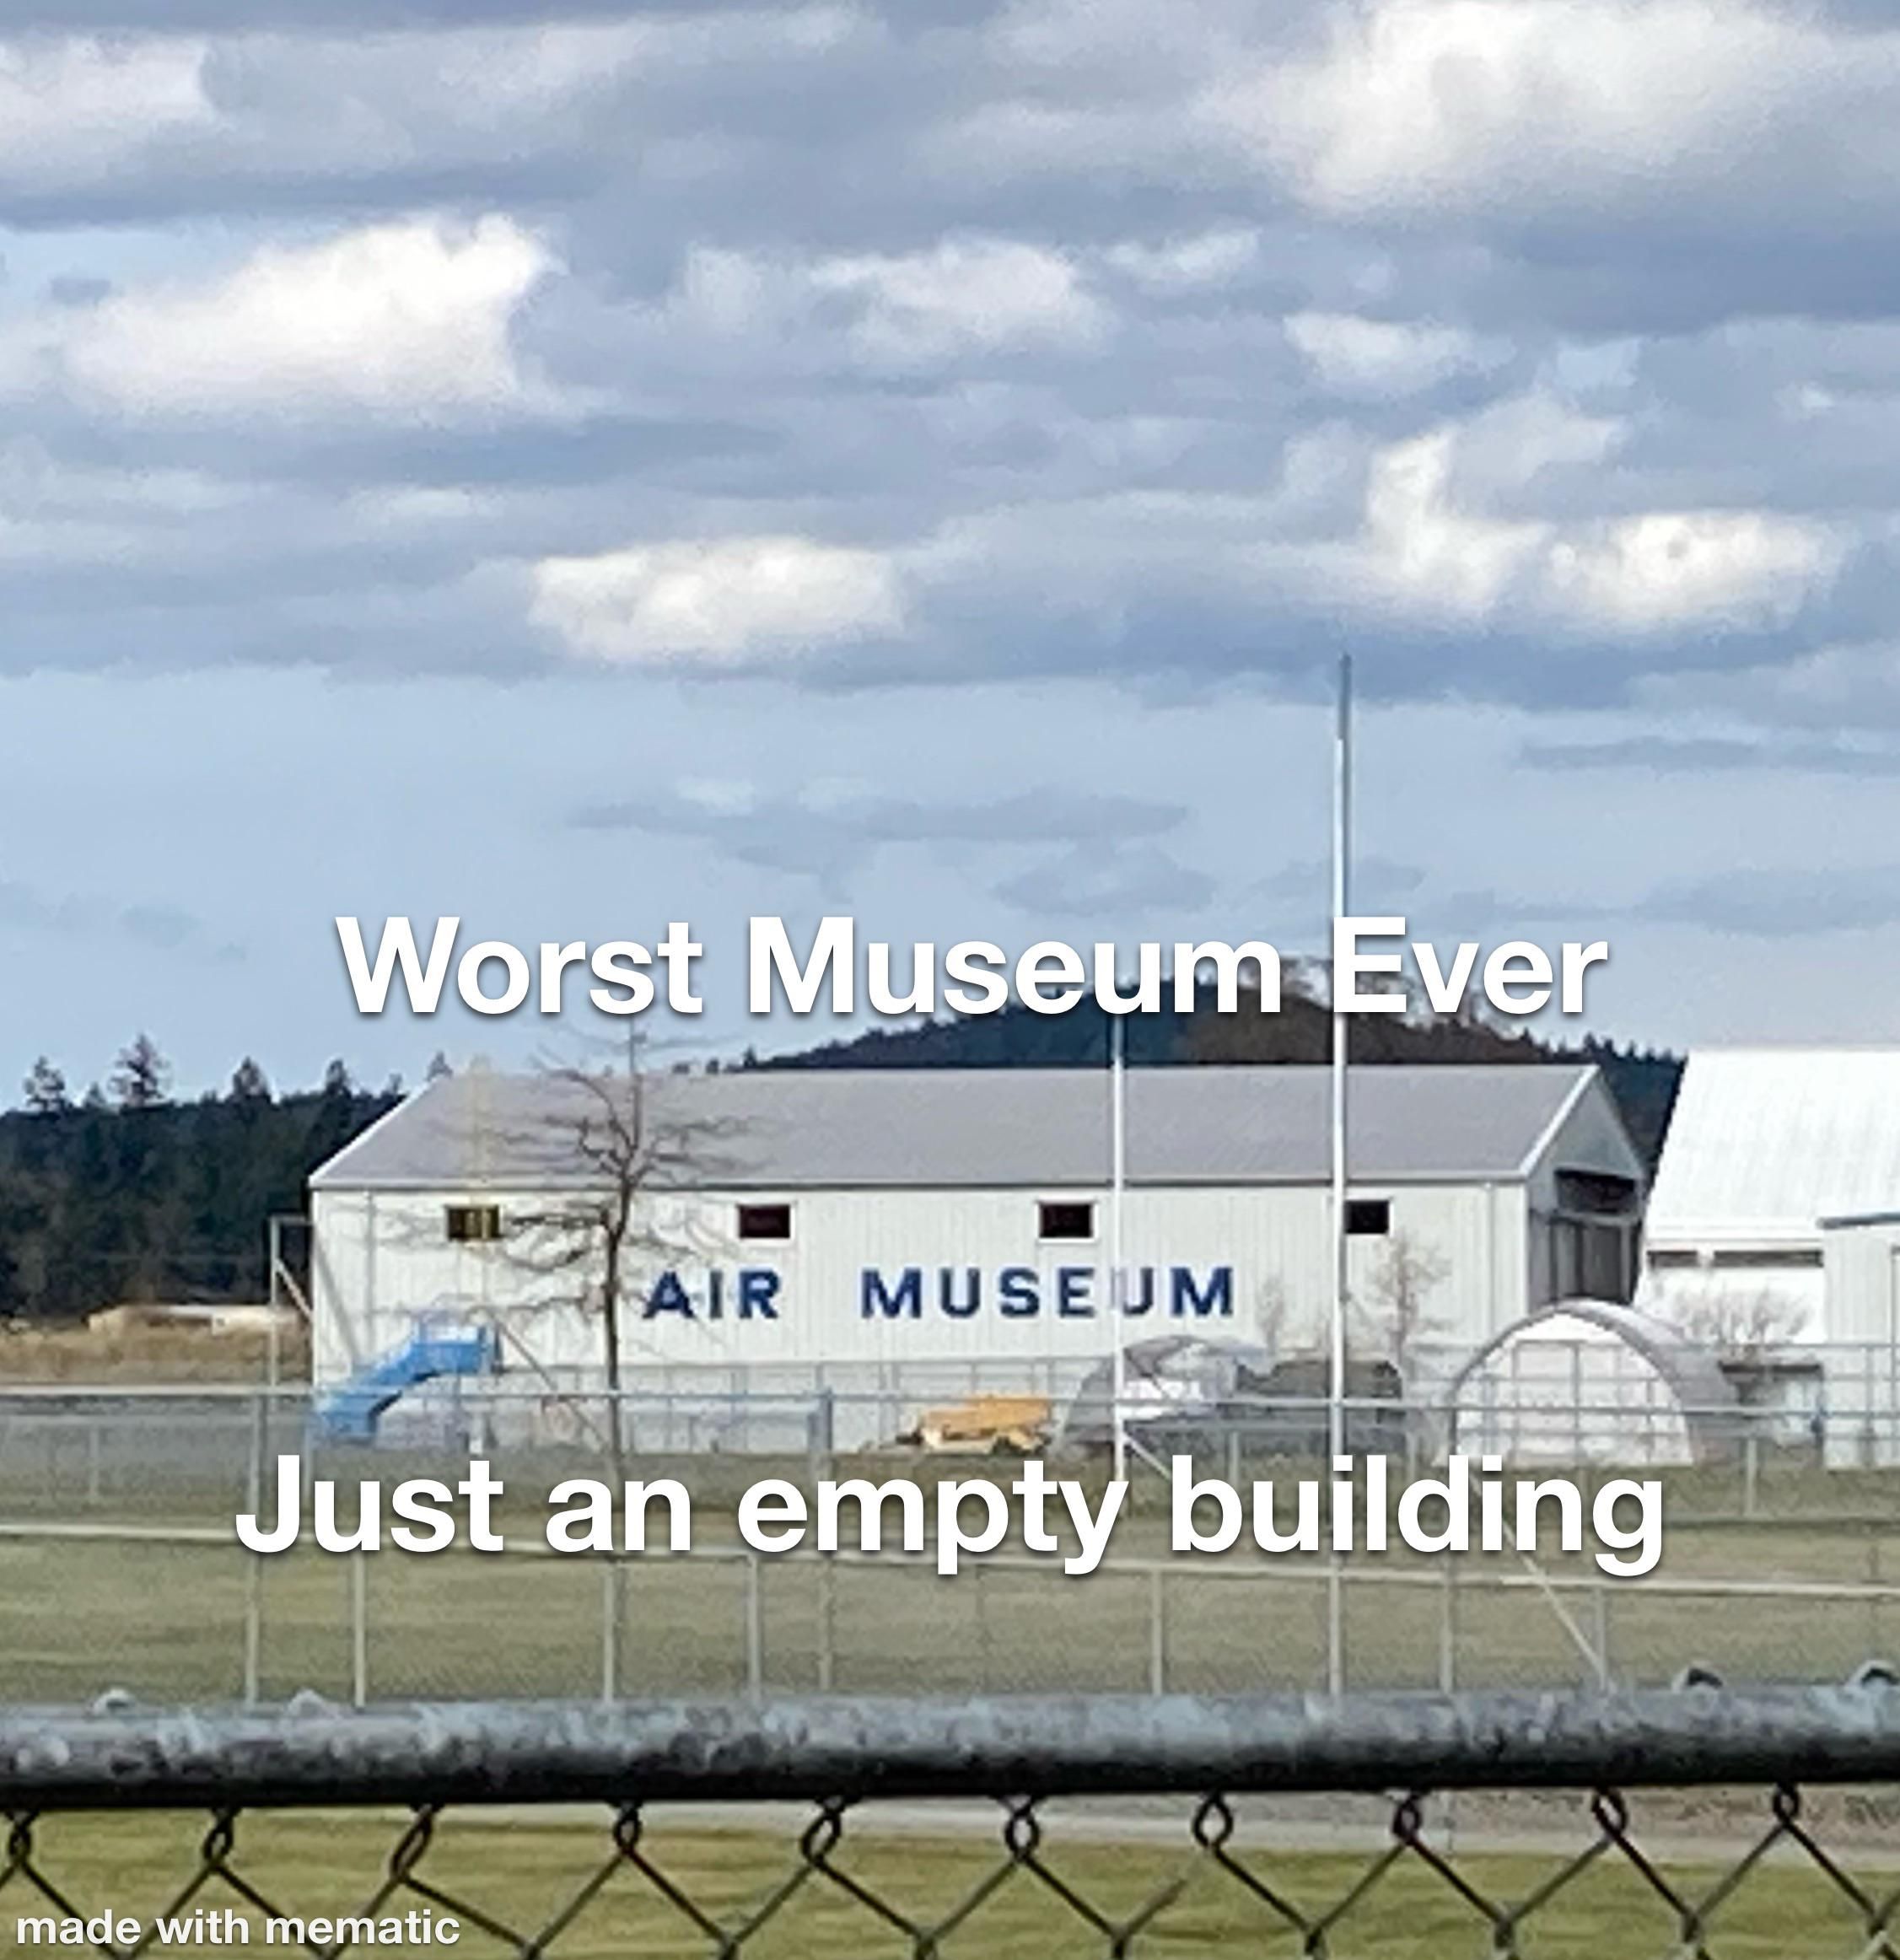 The worst museum I’ve ever been to